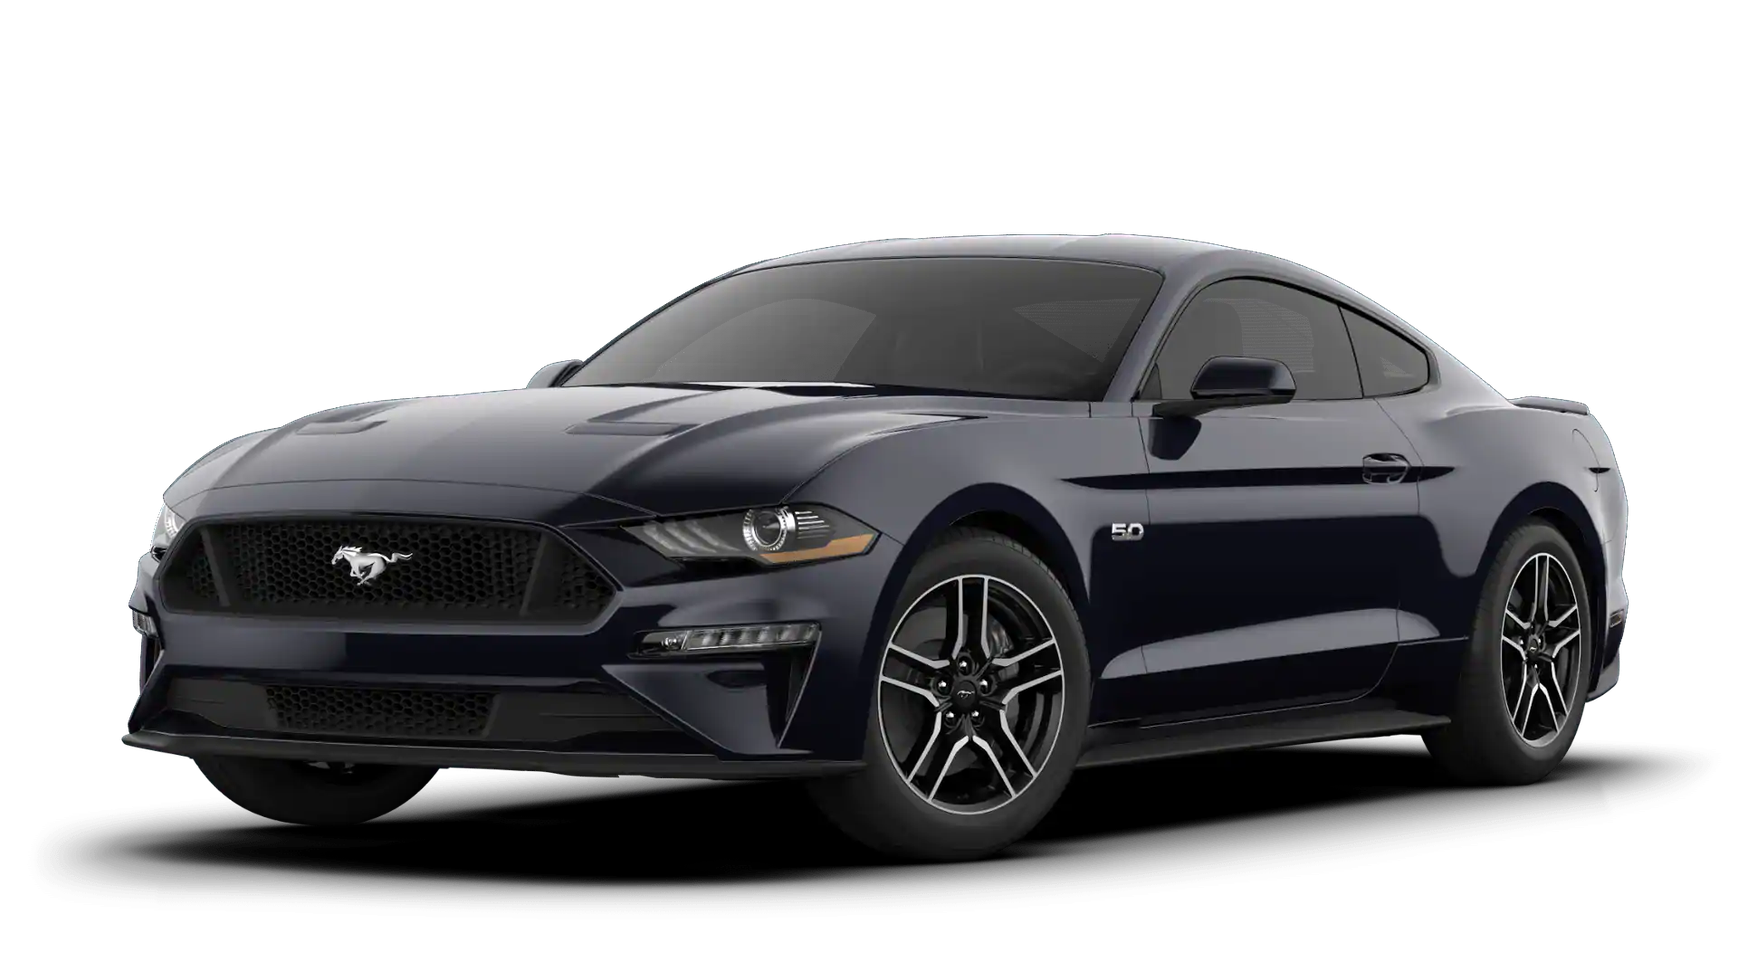 Ford Mustang GT Fastback 2020